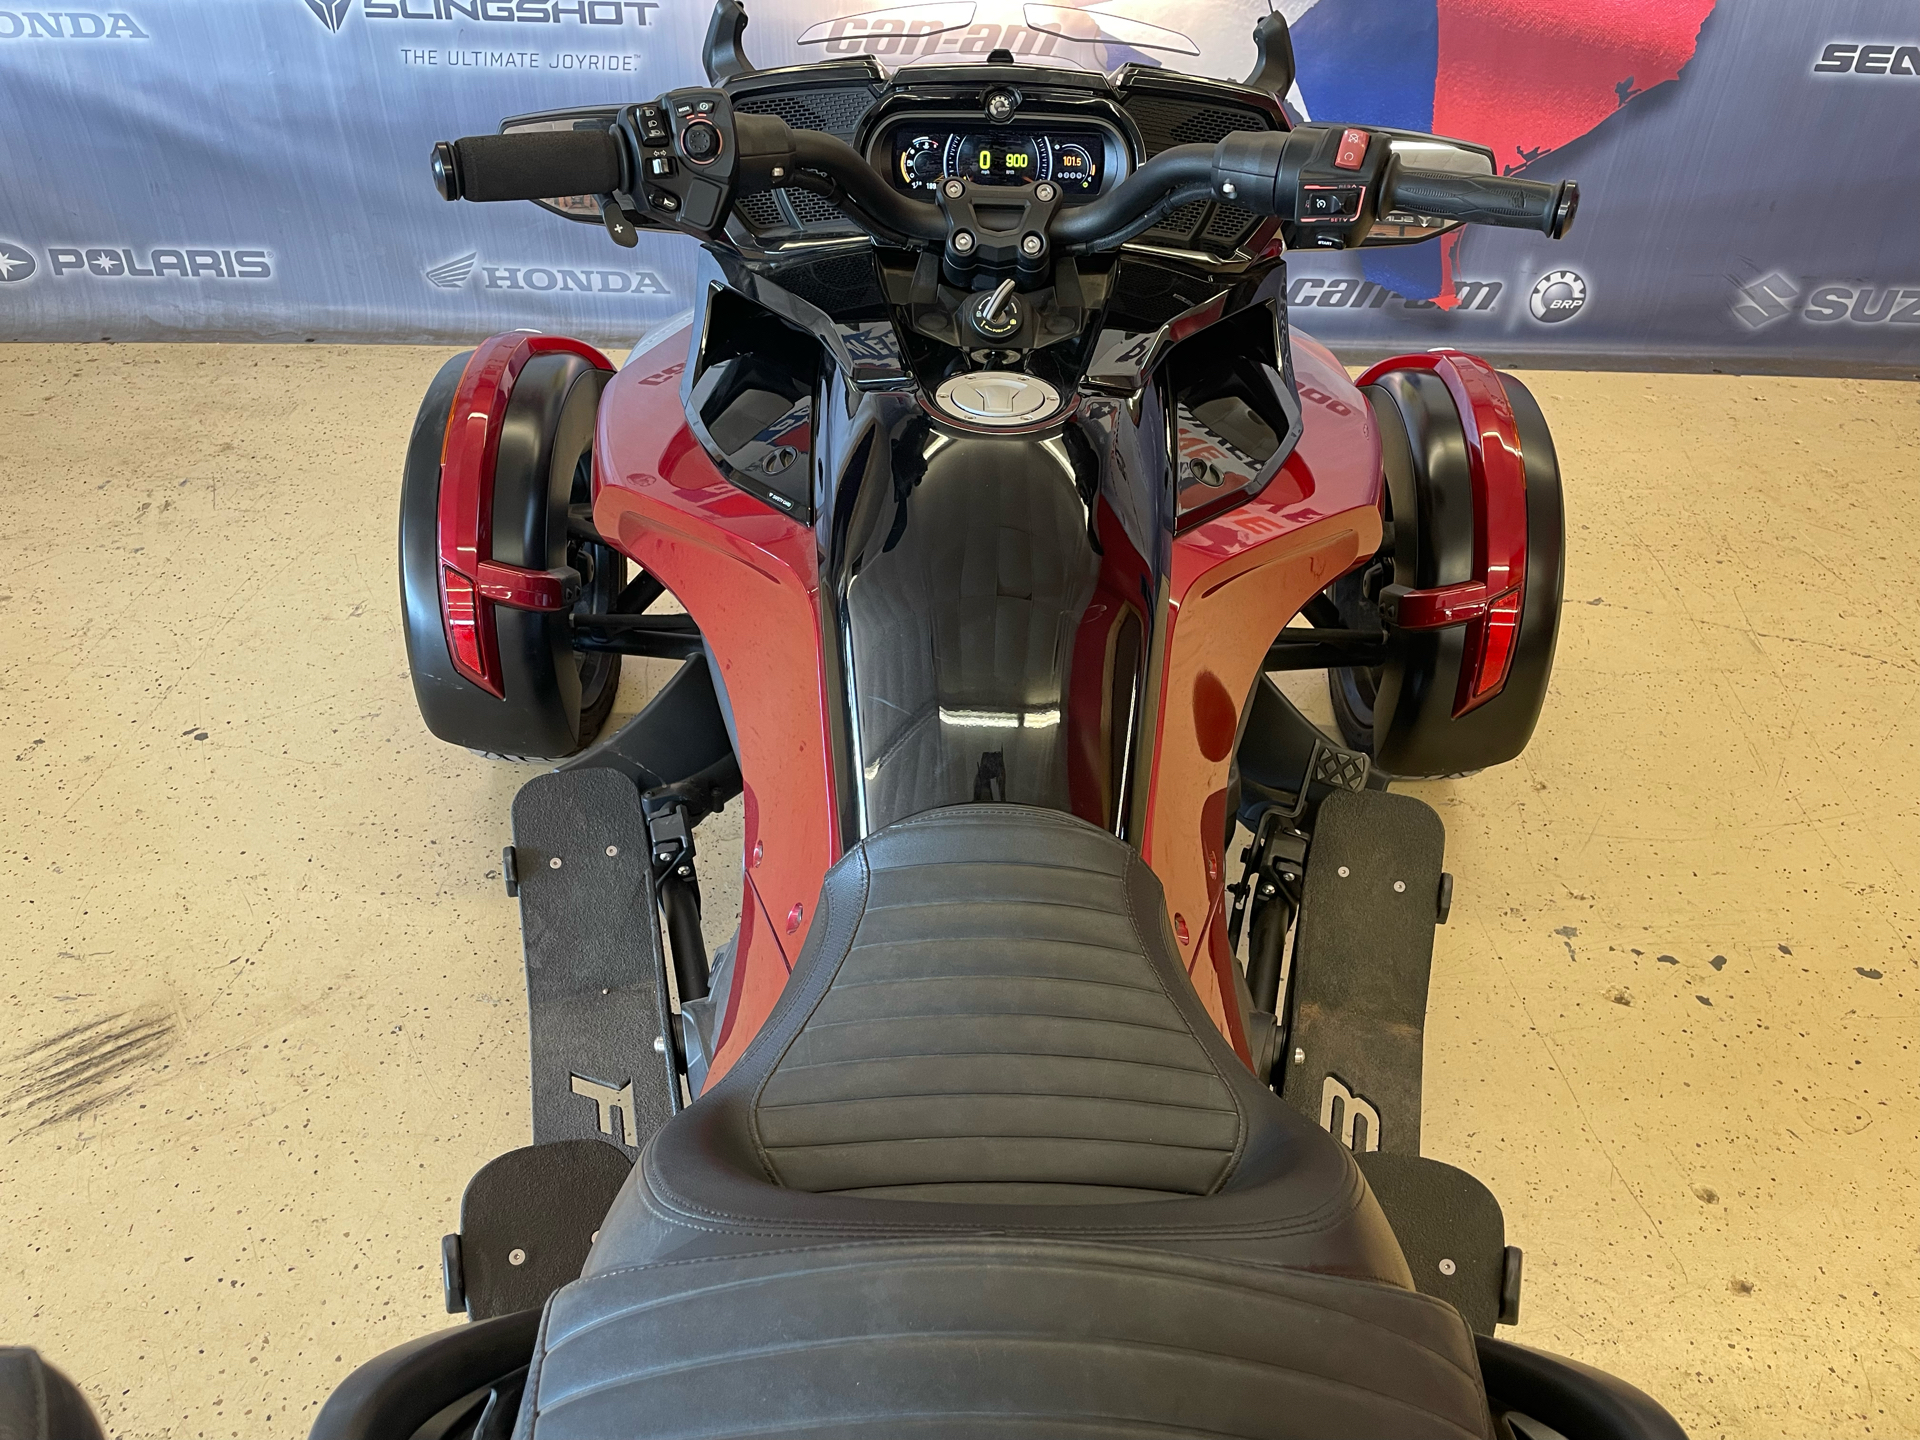 2018 Can-Am Spyder F3-T in Clovis, New Mexico - Photo 5